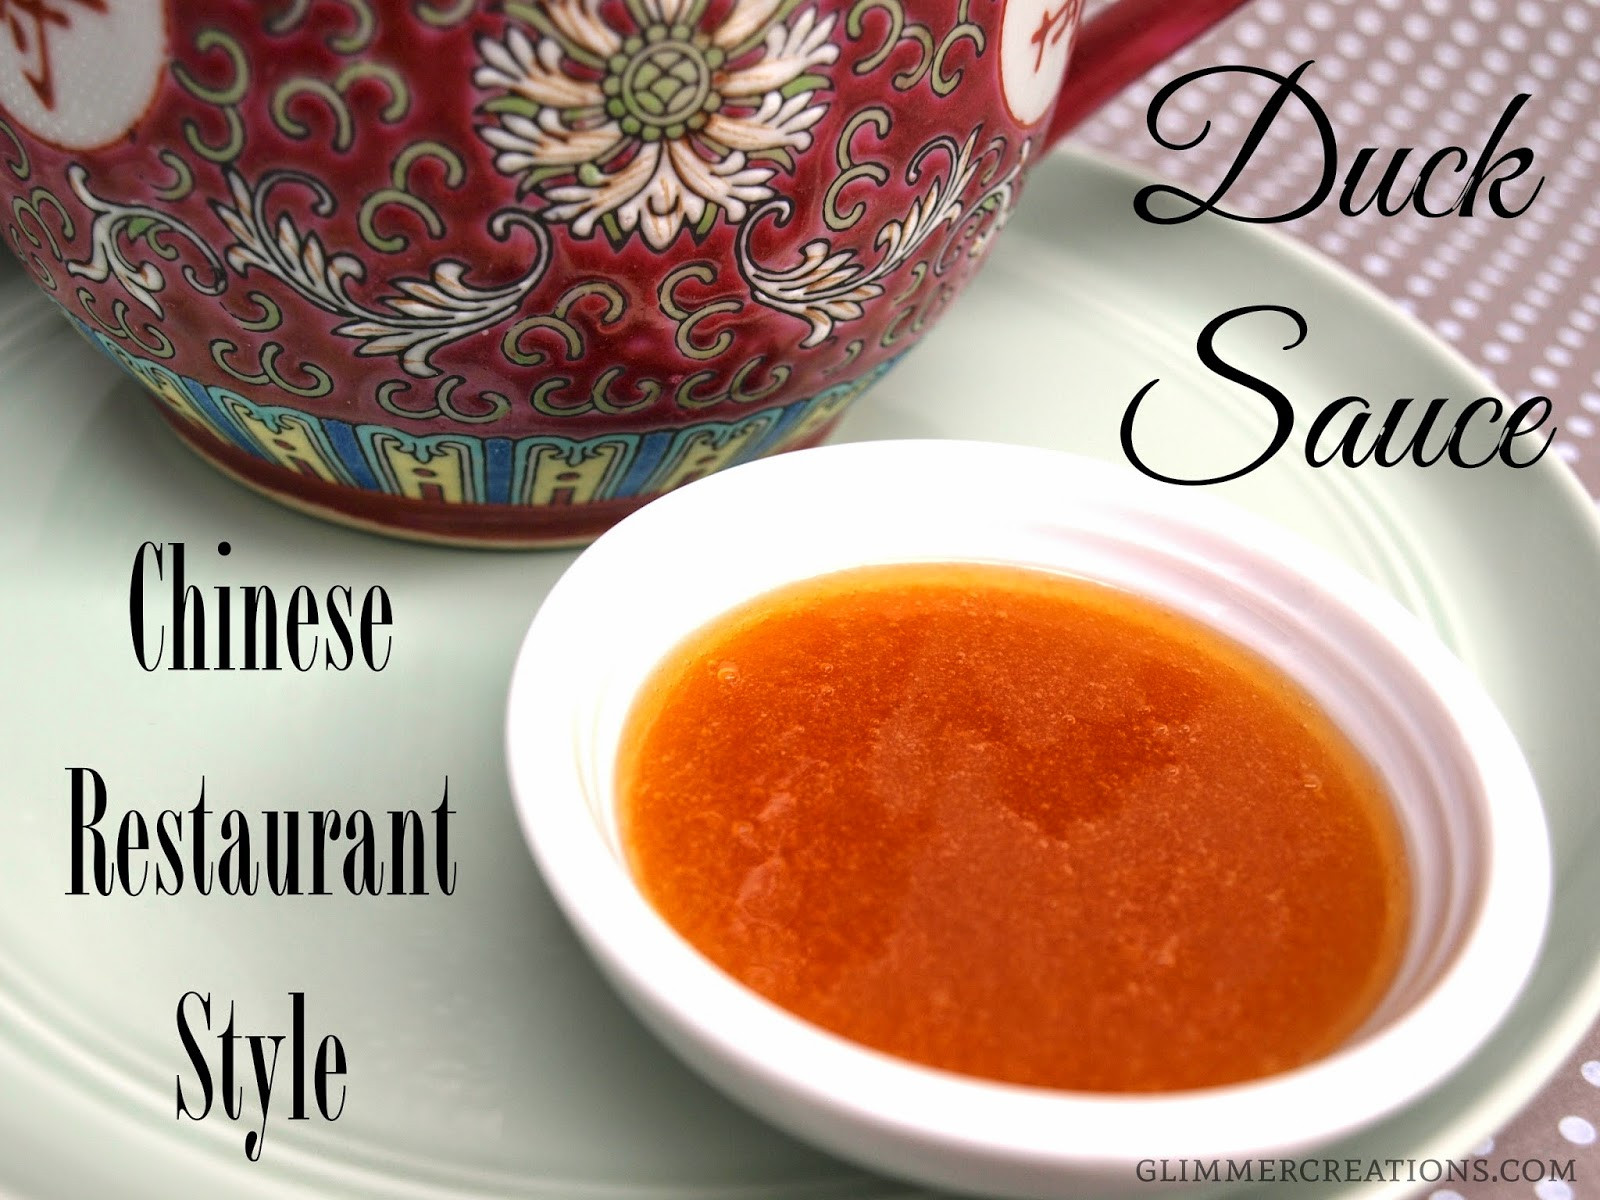 Chinese Restaurants Recipes
 Glimmer Creations Chinese Restaurant Style Duck Sauce Recipe